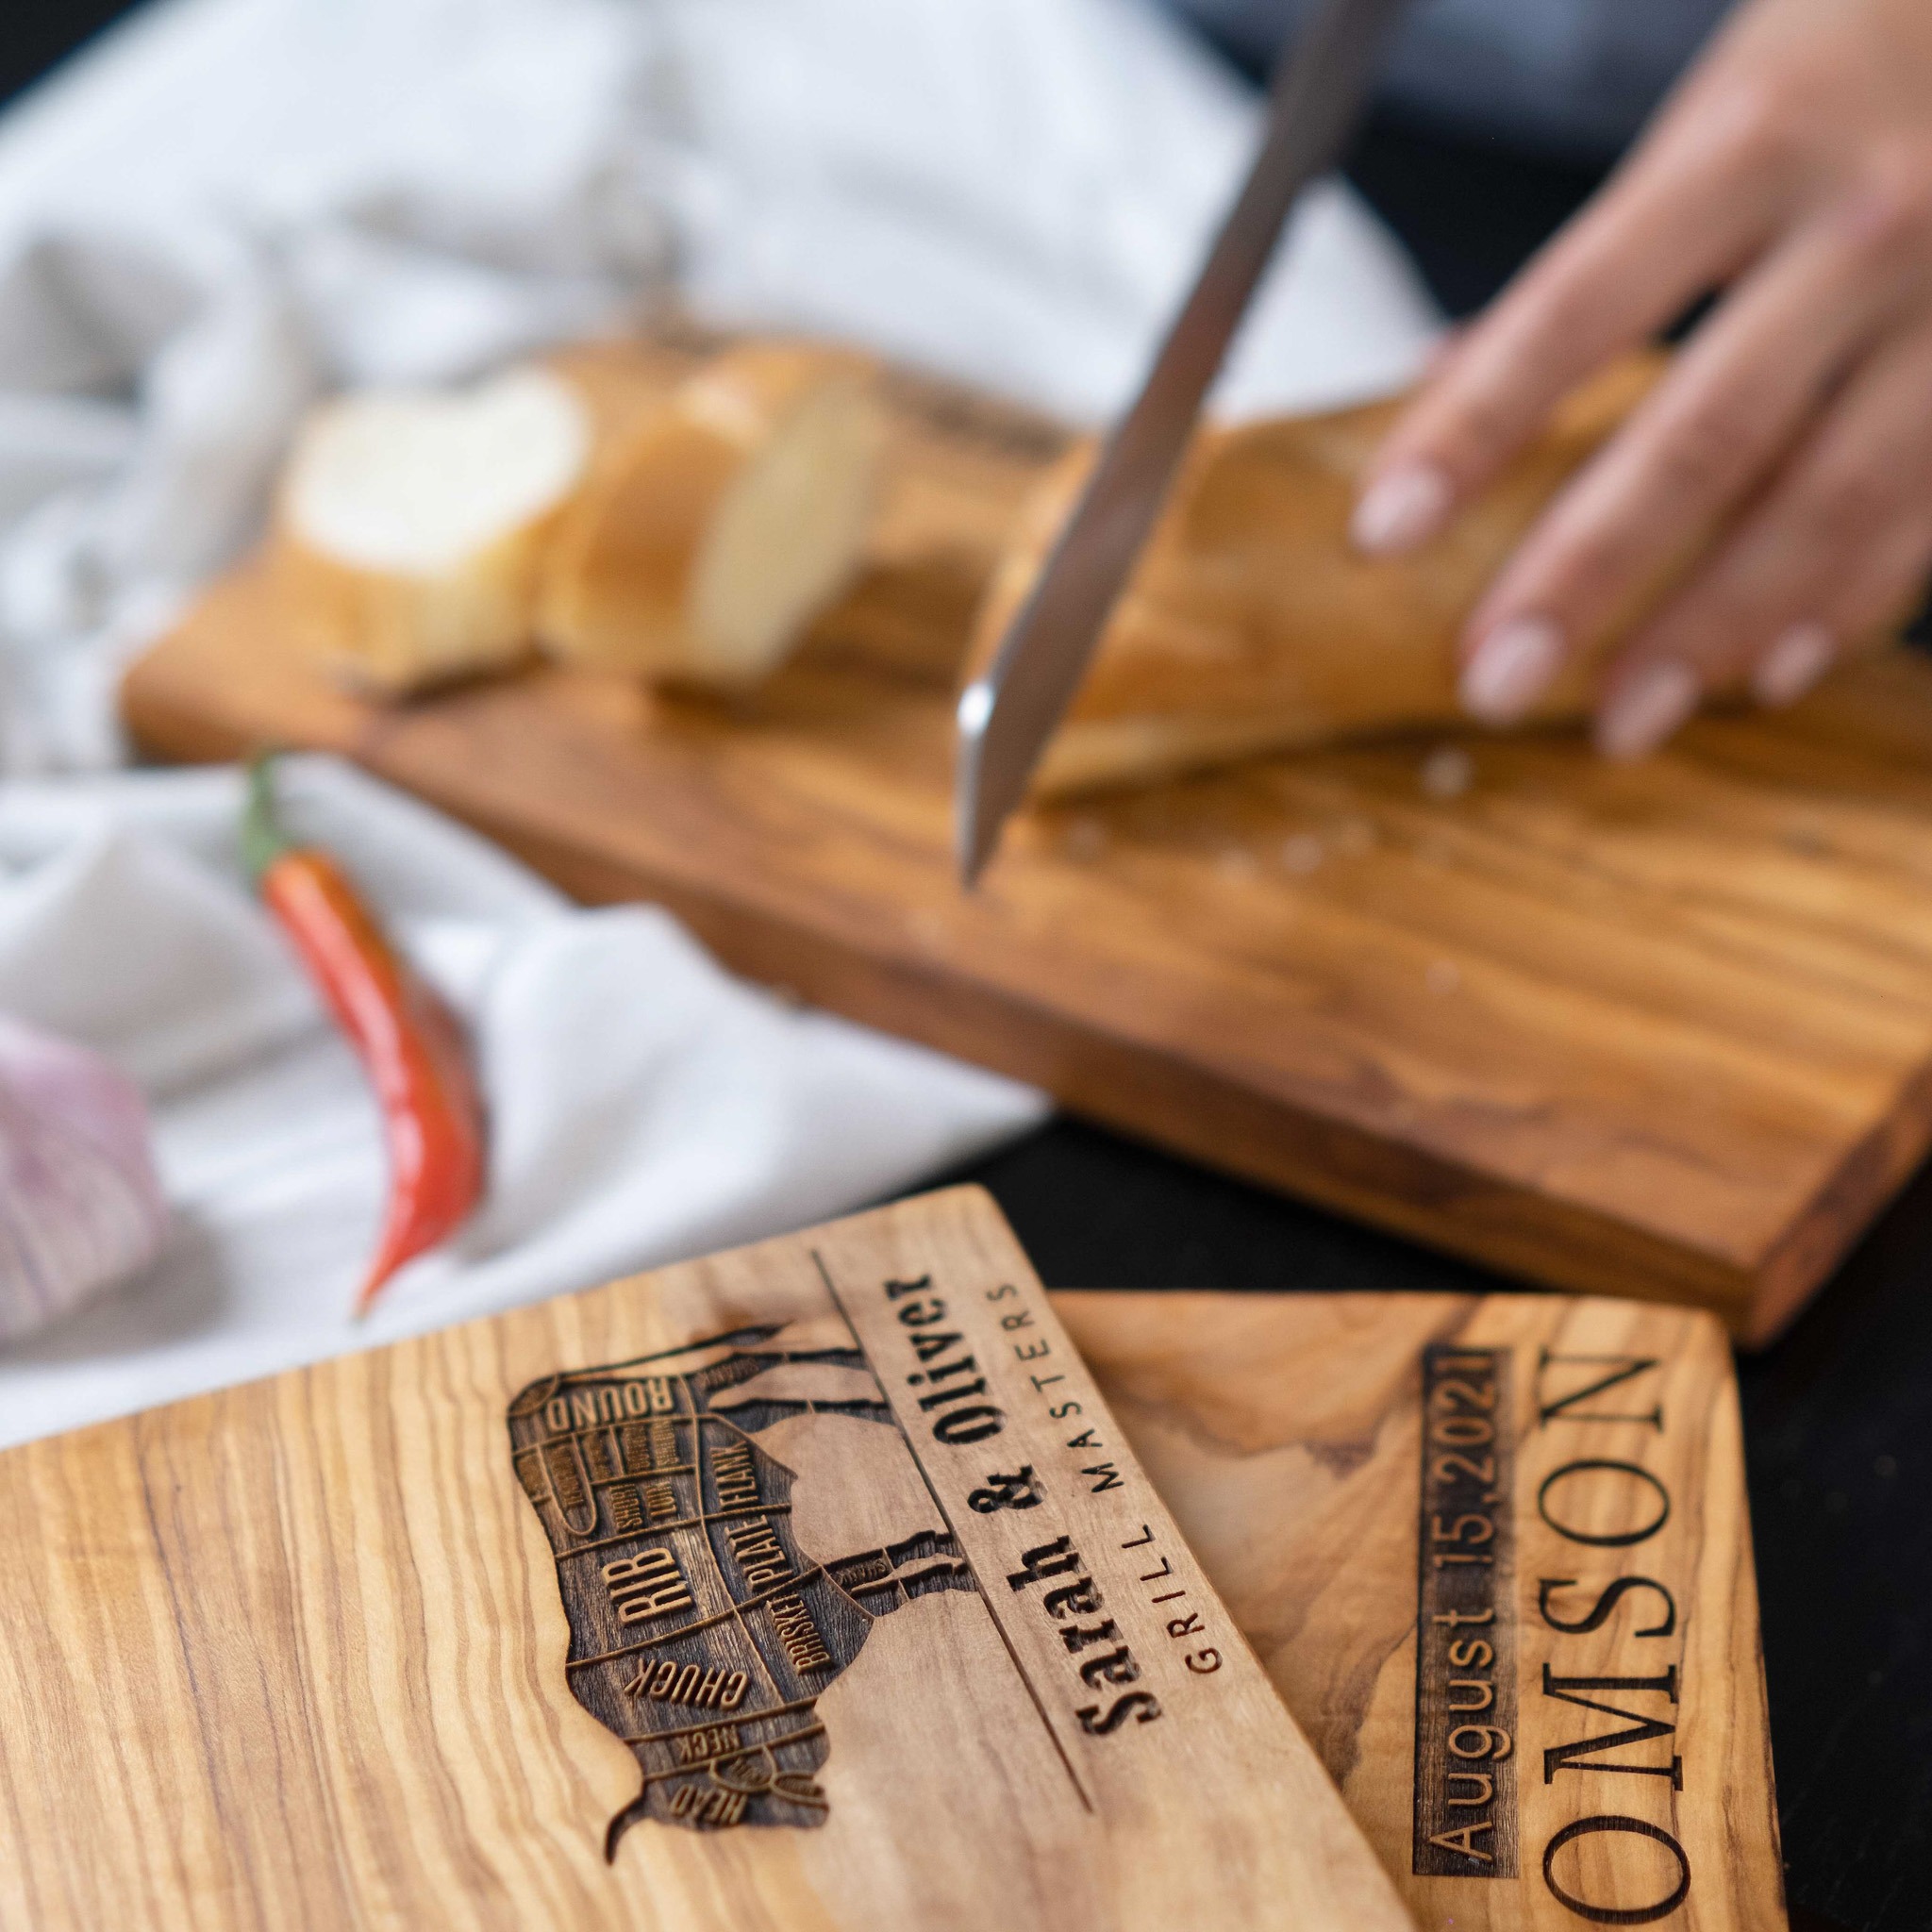 A person is slicing a piece of bread on a wooden cutting board.